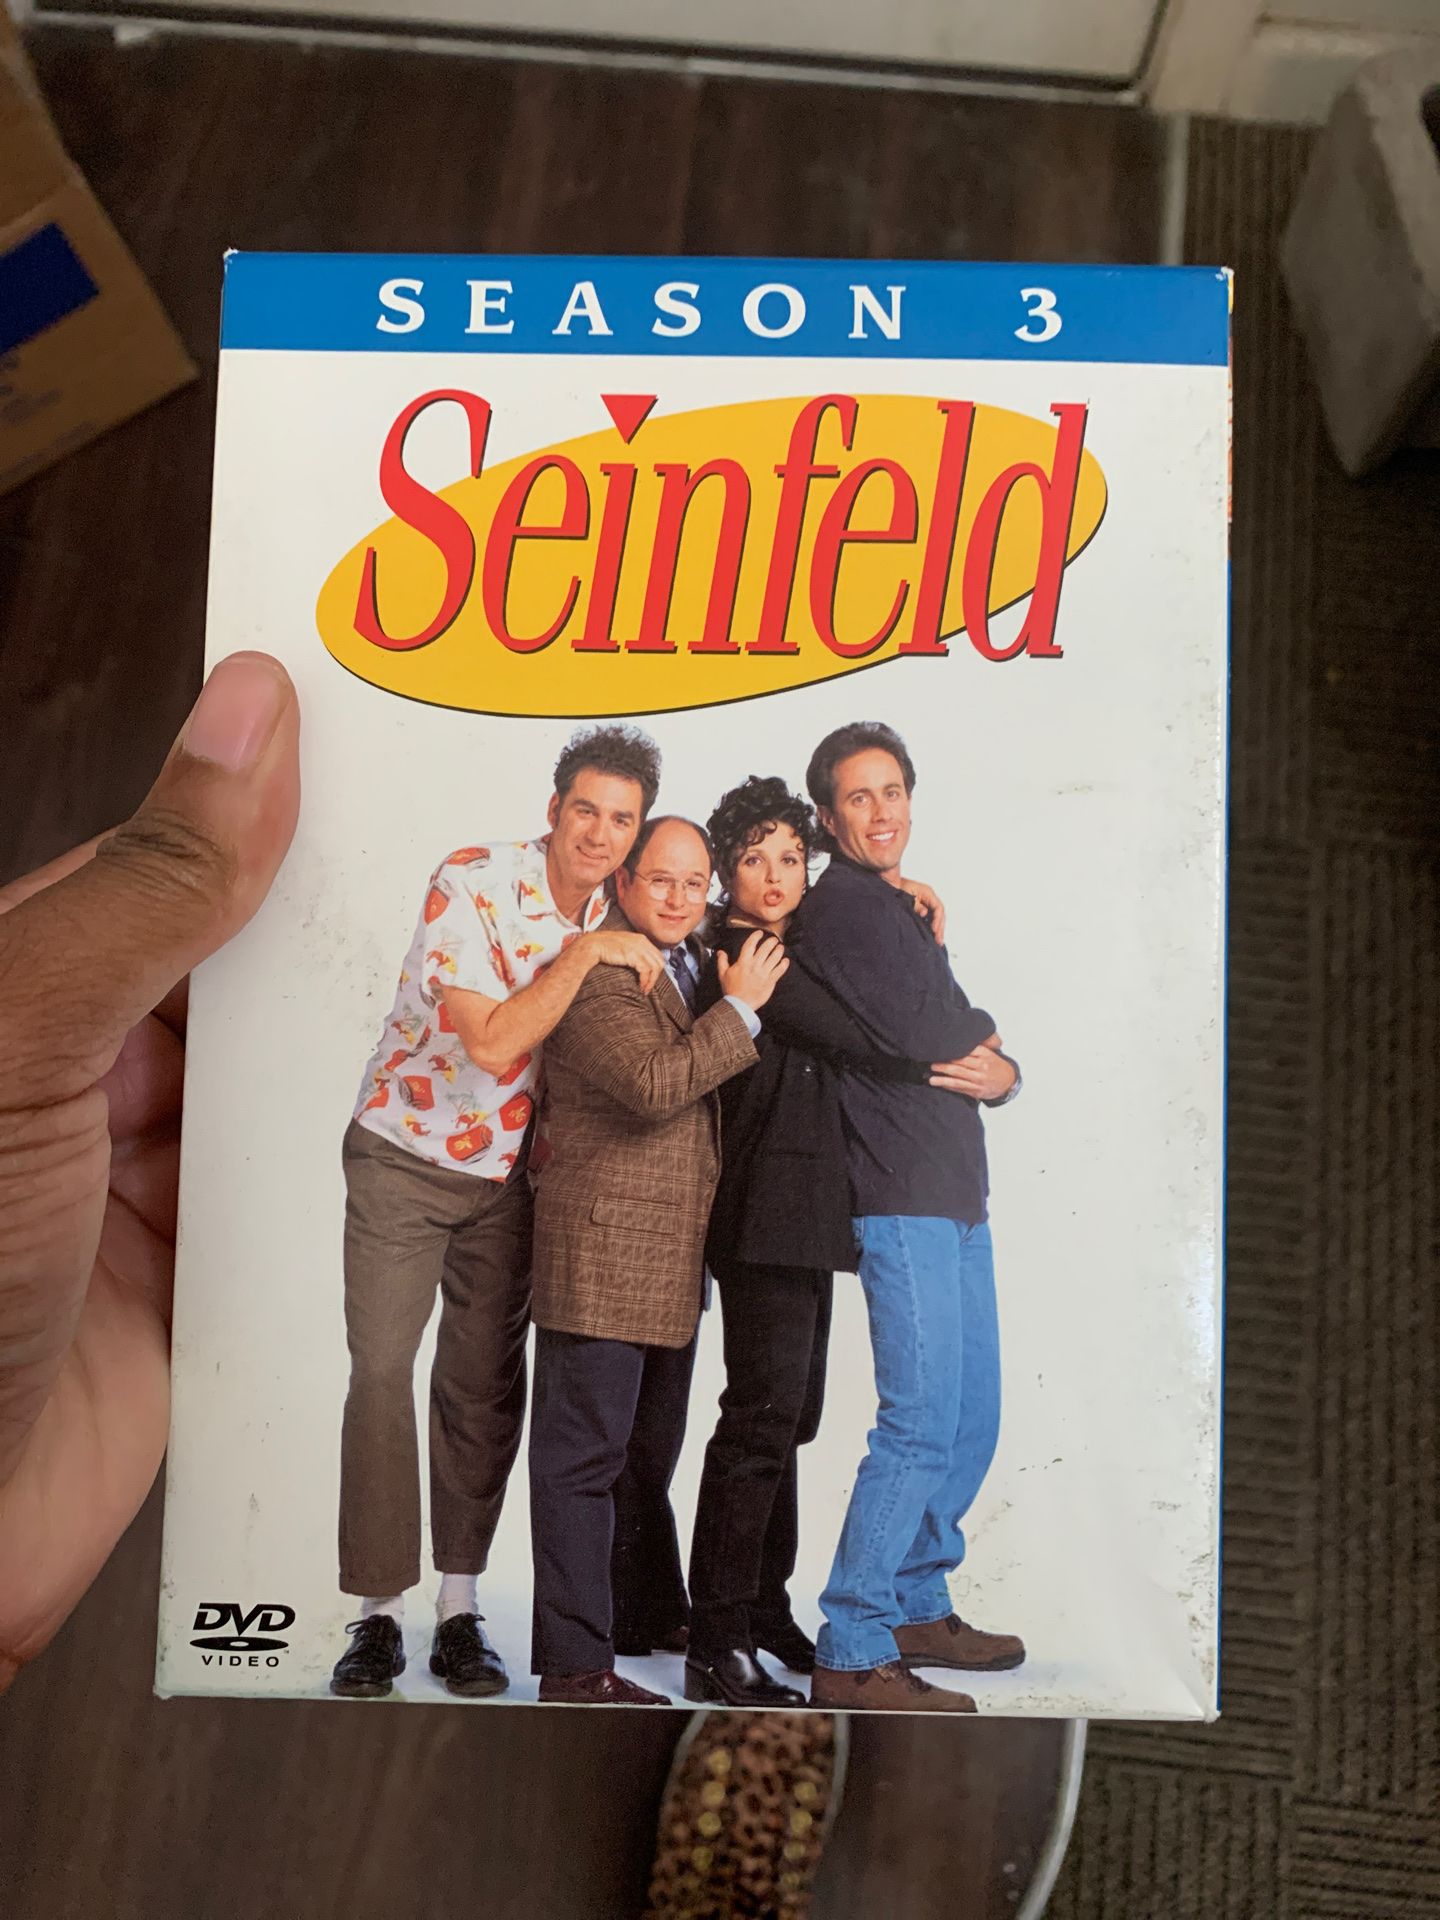 Free Seinfeld Dvds to home in need